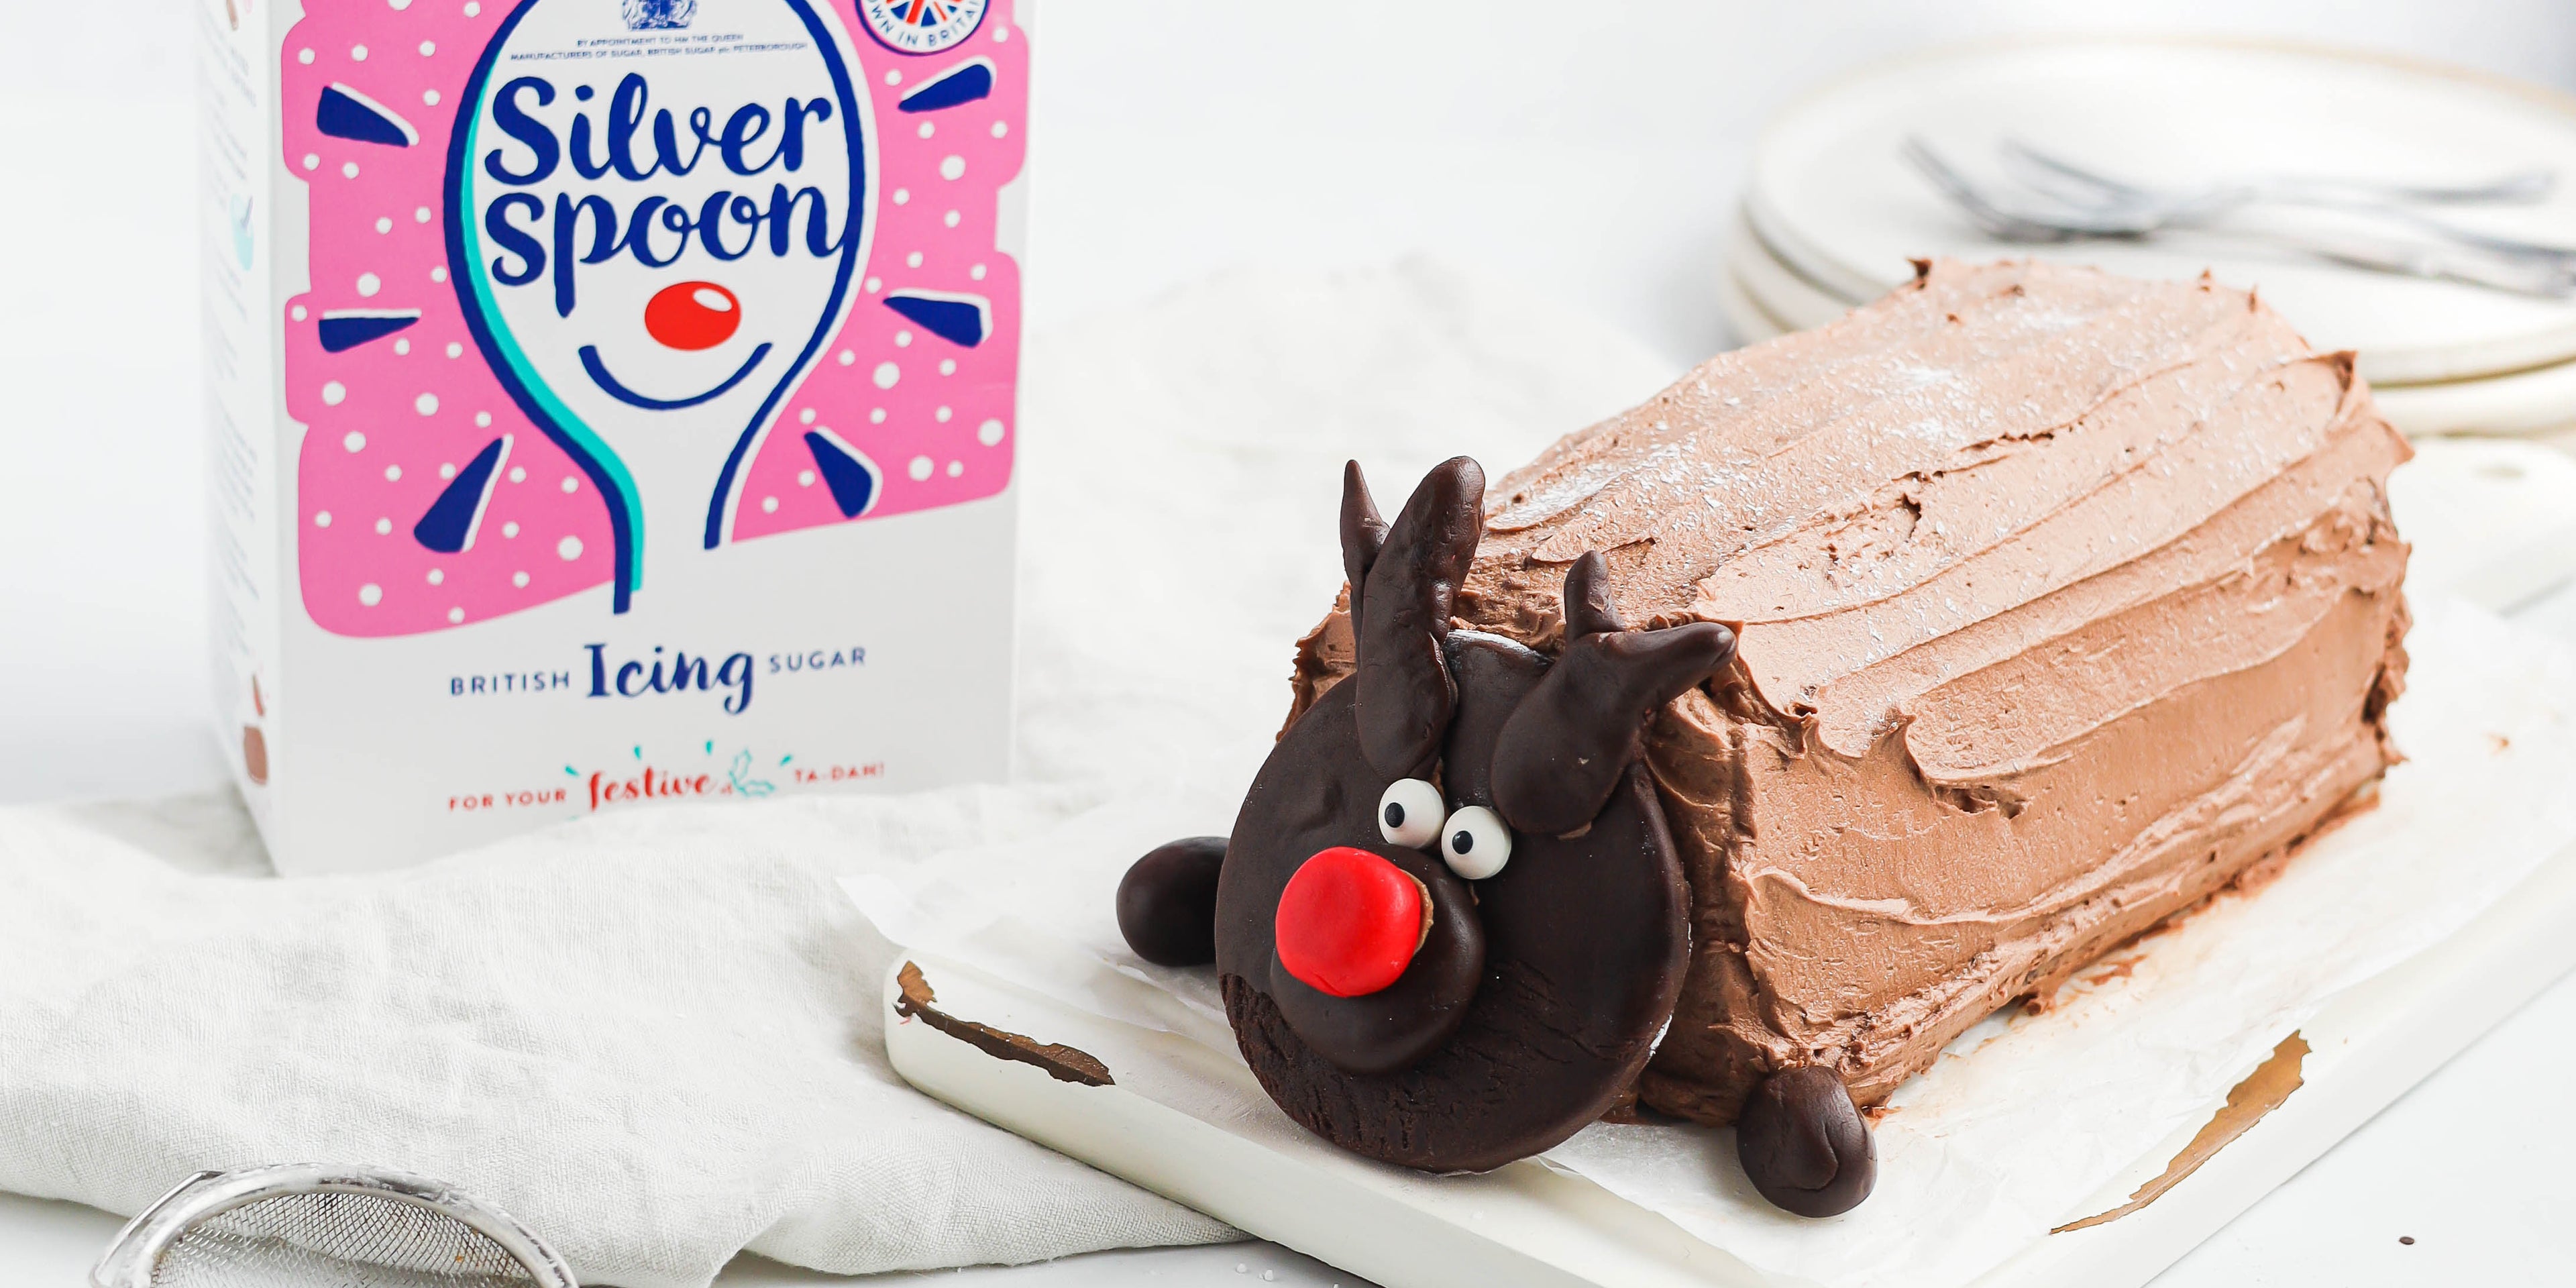 Chocolate Yule Log with a chocolate reindeer face made out of dark chocolate. A box of Silver Spoon Icing sugar in the background